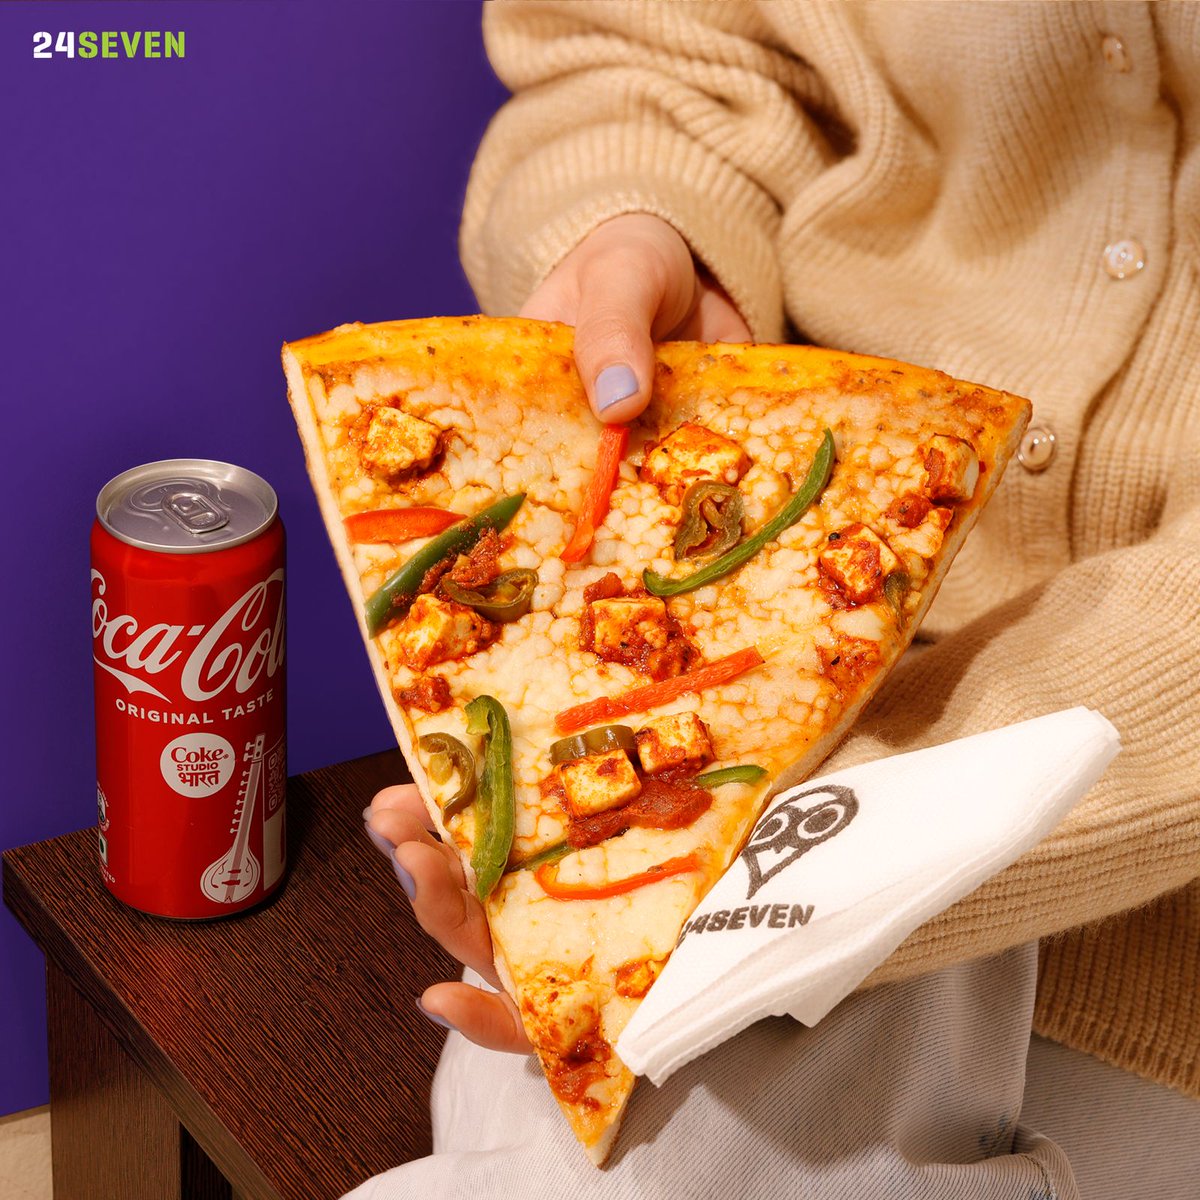 Caught between meetings and deadlines? Swing by 24Seven for this power combo to keep you going without slowing down! 😌🙌
#MealsToGo

#24Seven #24Sevenin #Meals #Snacks #Food #Foodies #Pizza #Coke #PizzaLovers #PaneerPizza #ConvenientHai  #Visit24Seven